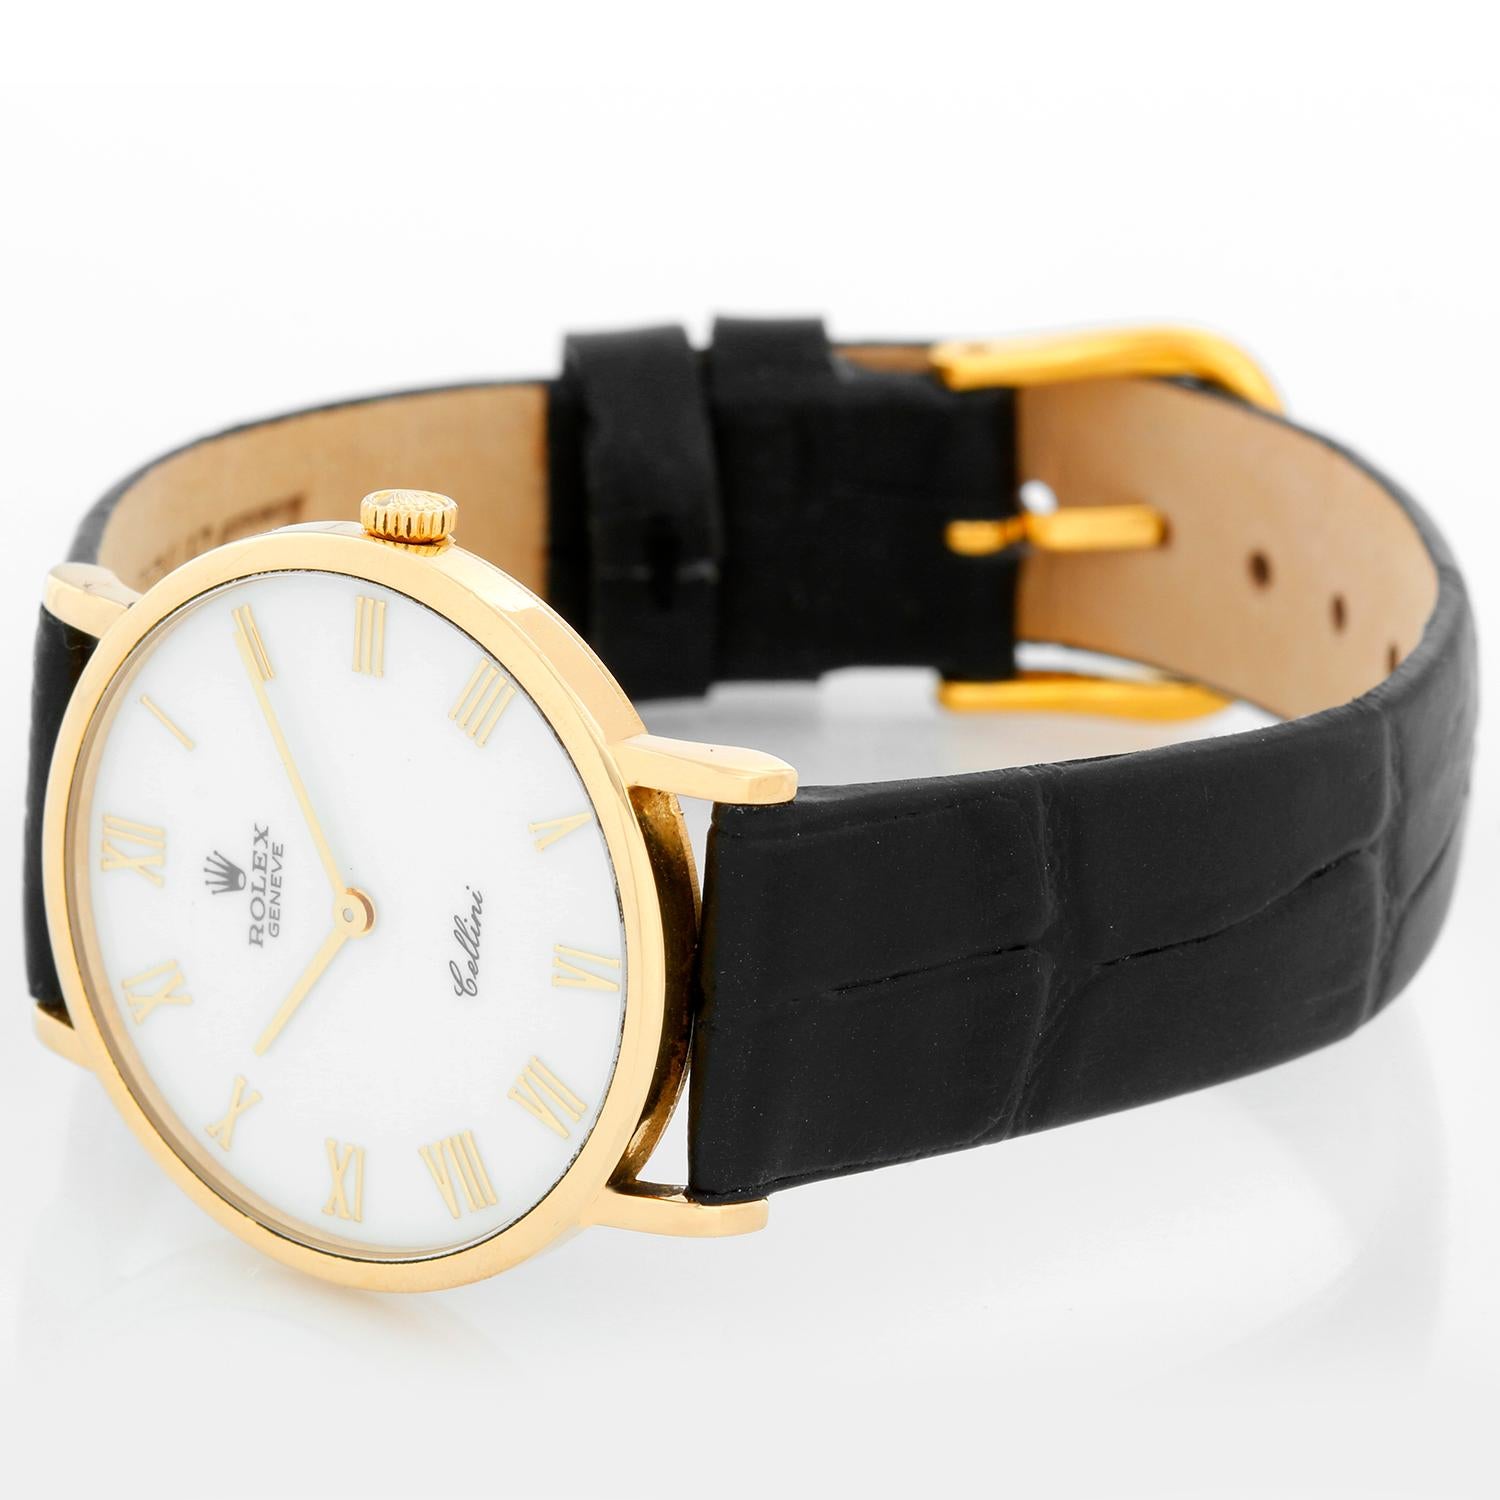 Rolex Cellini Classic 18k Yellow Gold Men's Watch 5112 White Roman Dial -  Manual winding. 18k yellow gold case (32mm diameter). White dial with gold Roman numerals. Strap band with 18k yellow gold Rolex buckle. Pre-owned with box.